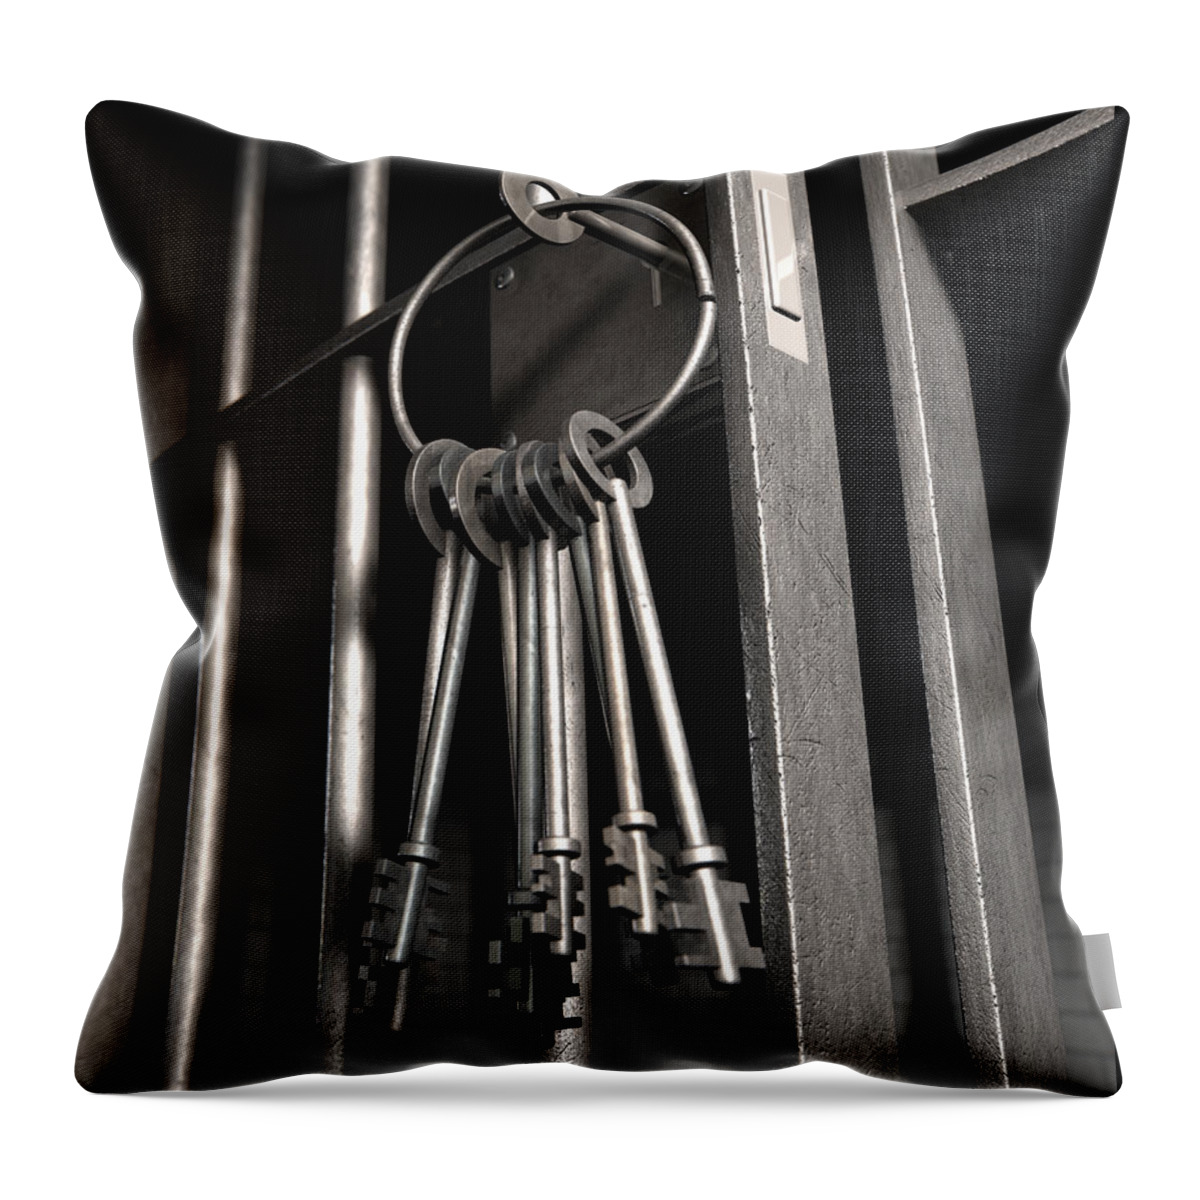 Jail Throw Pillow featuring the digital art Jail Cell With Open Door And Bunch Of Keys by Allan Swart